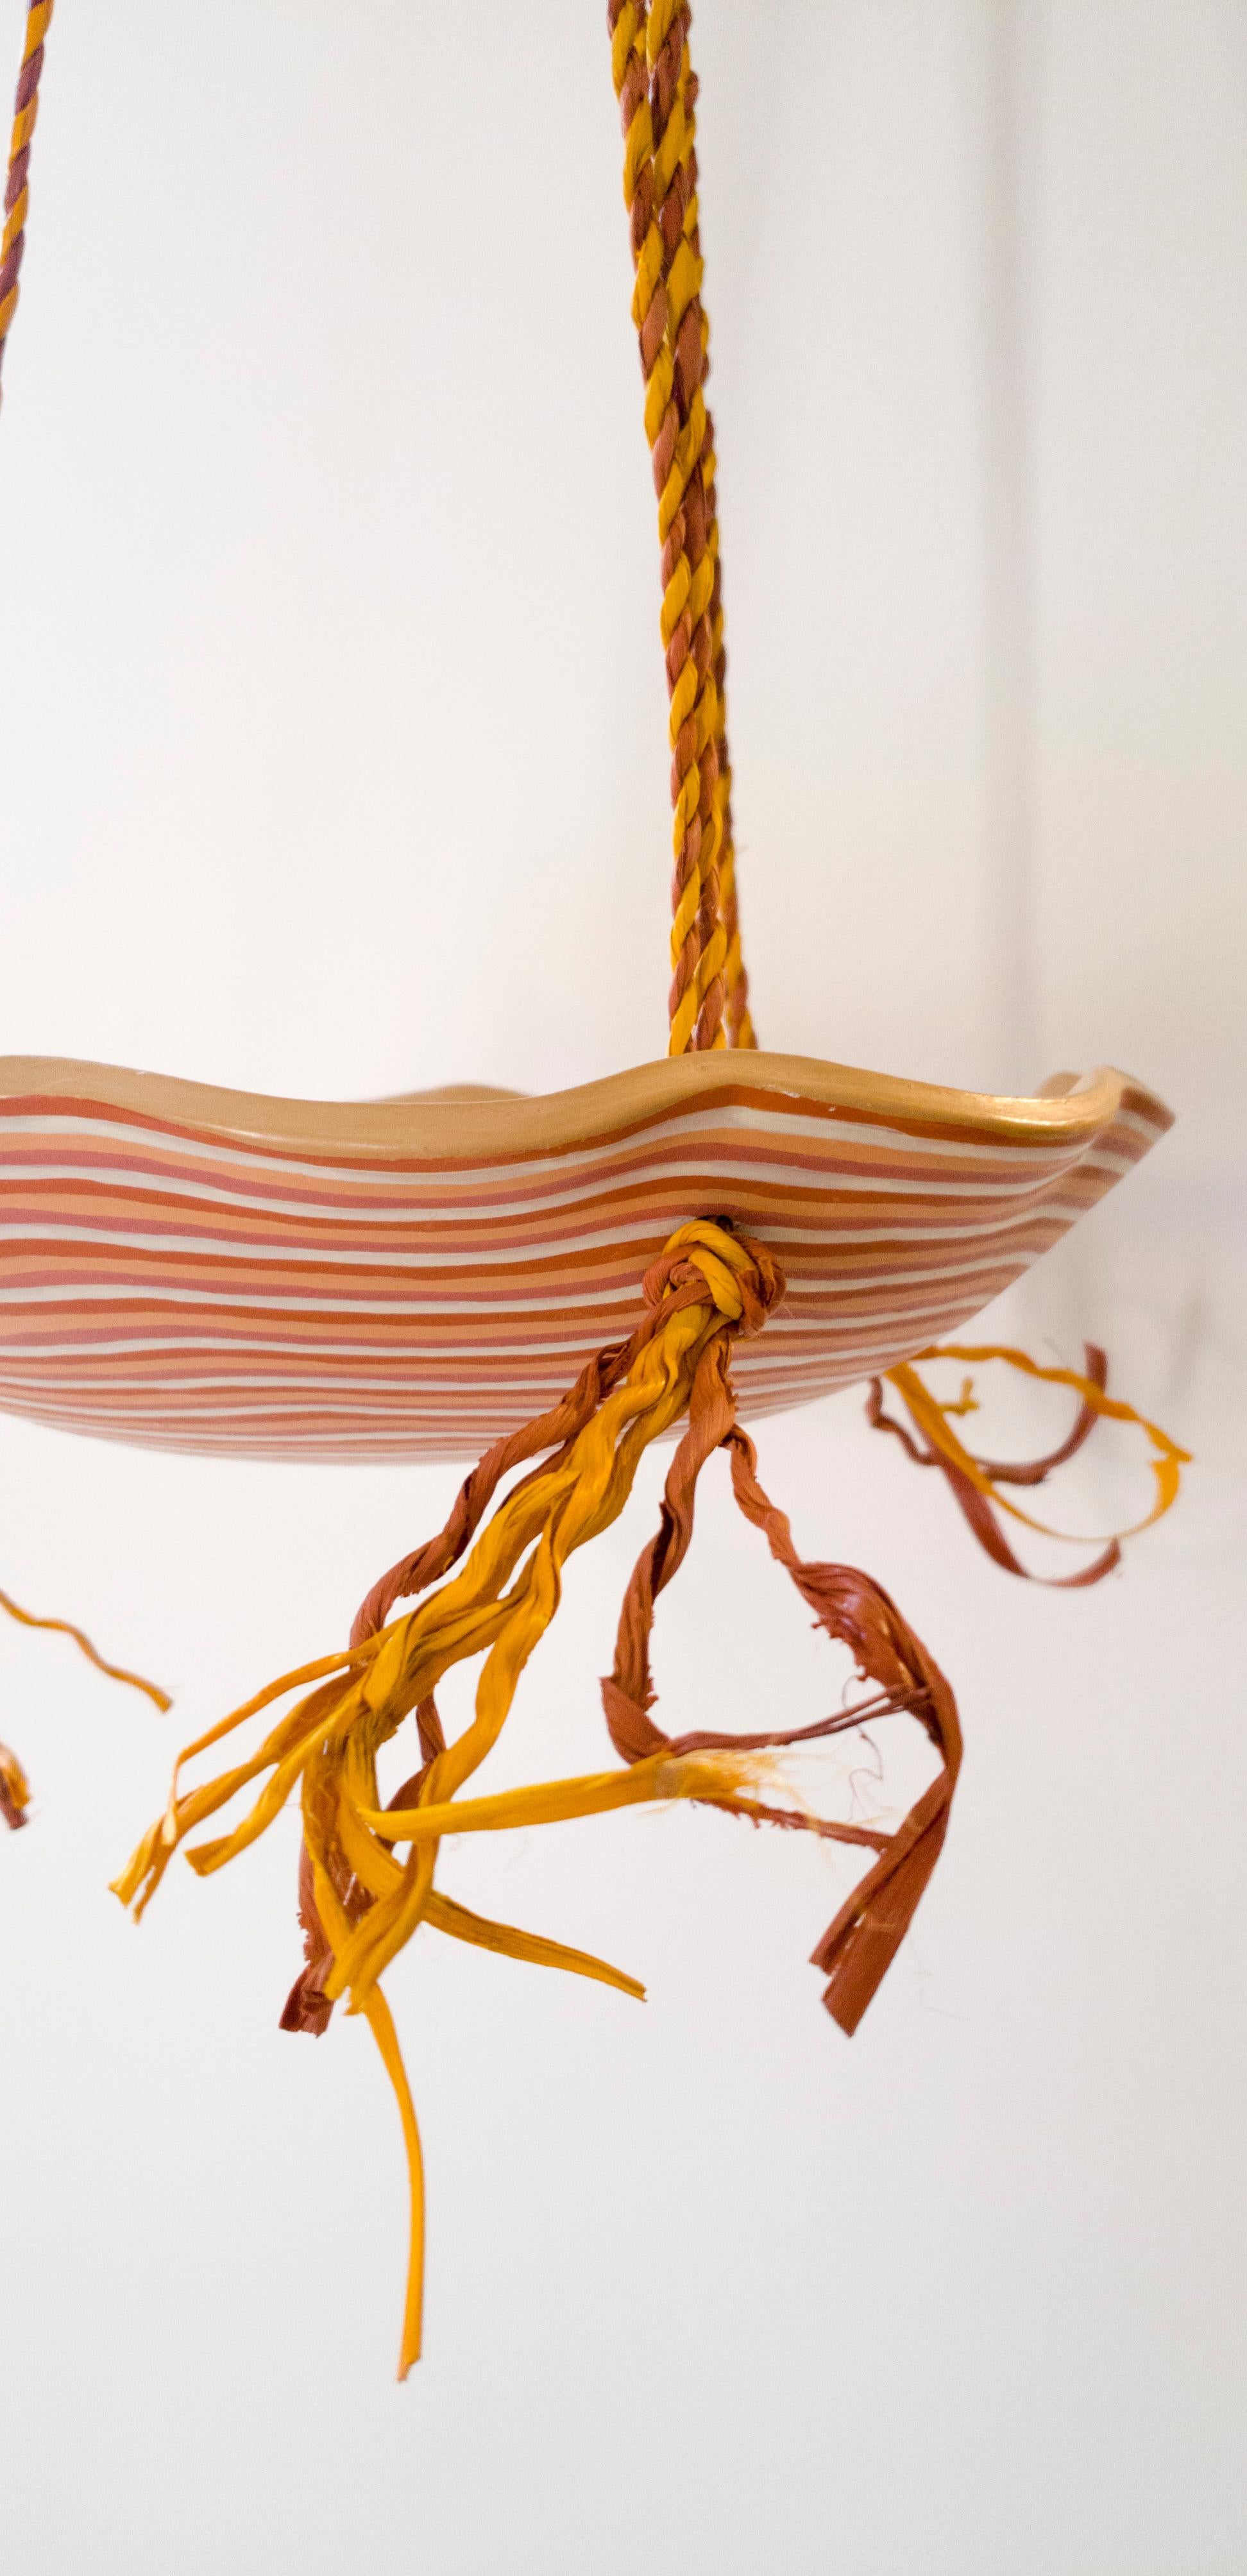 Unique design piece

The Traditions Pottery and straw fruit bowl was first presented in Carimbo Exhibition at Yankatu Gallery, in November 2019 in São Paulo, Brazil and is part of the ALMA-Raiz (Soul and Roots) collection from Yankatu.

The